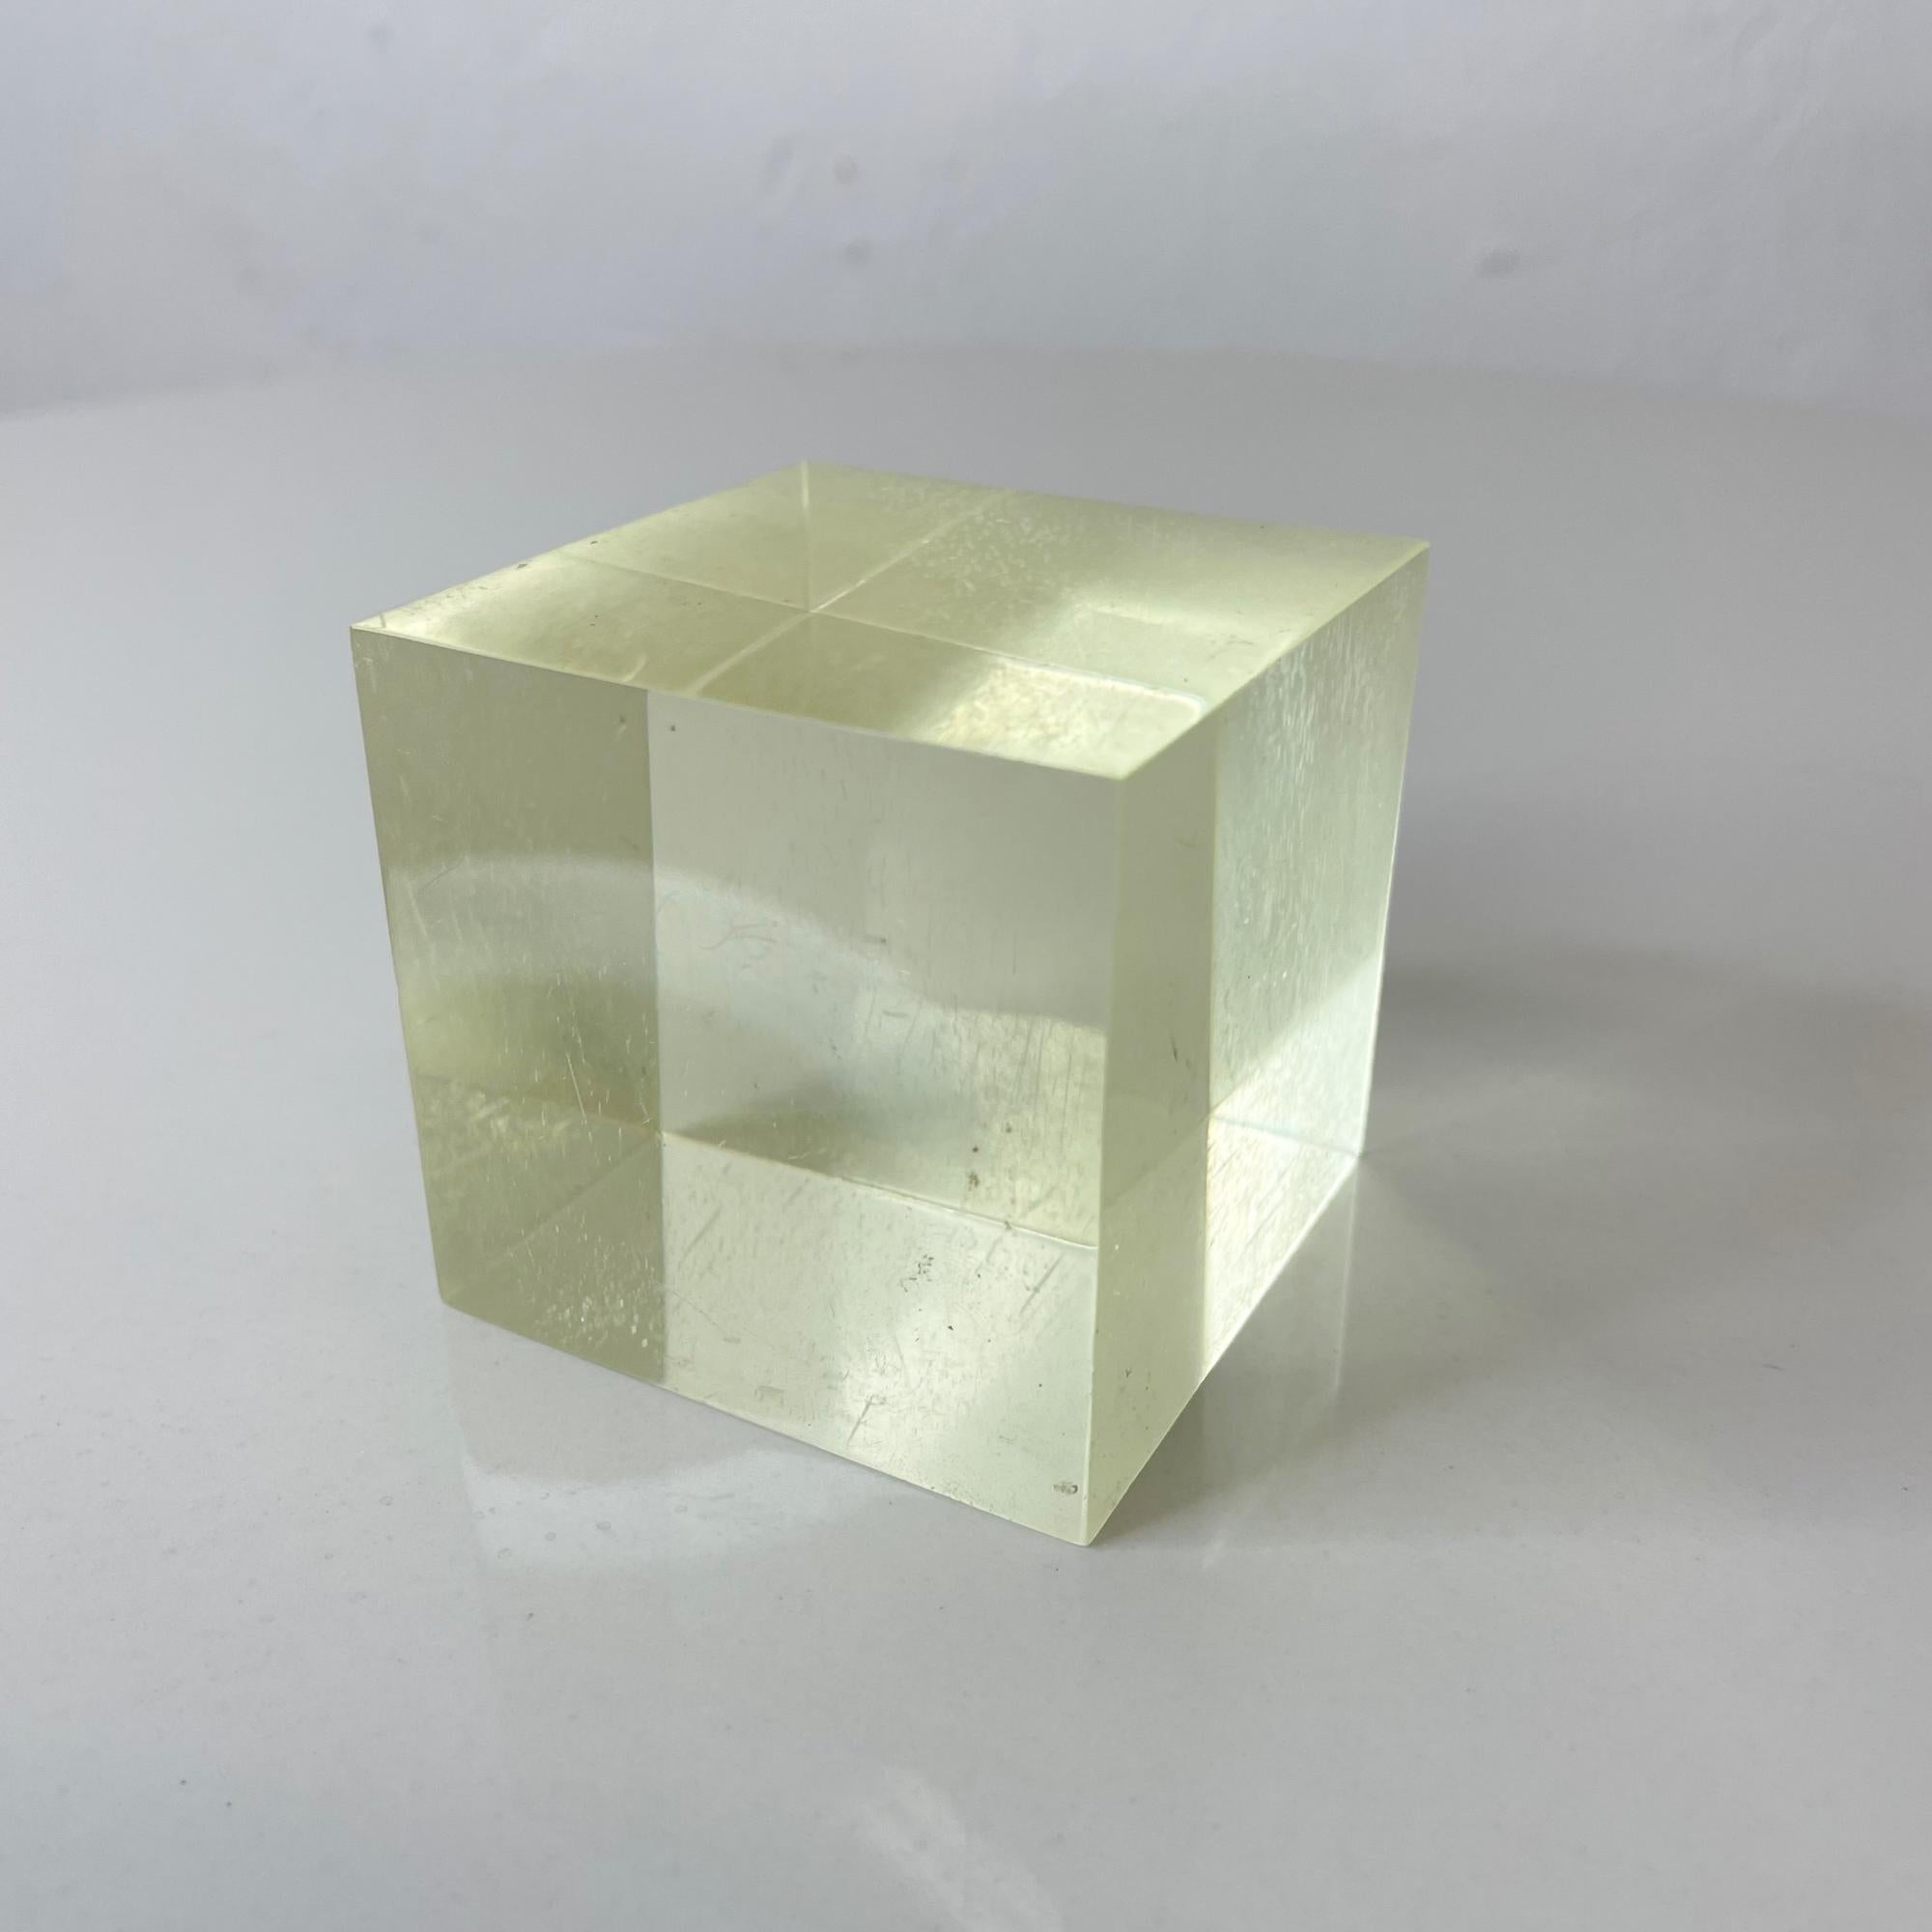 American Vintage Lucite Paperweight Geometric Cube 1970s Mod Desk Accessory